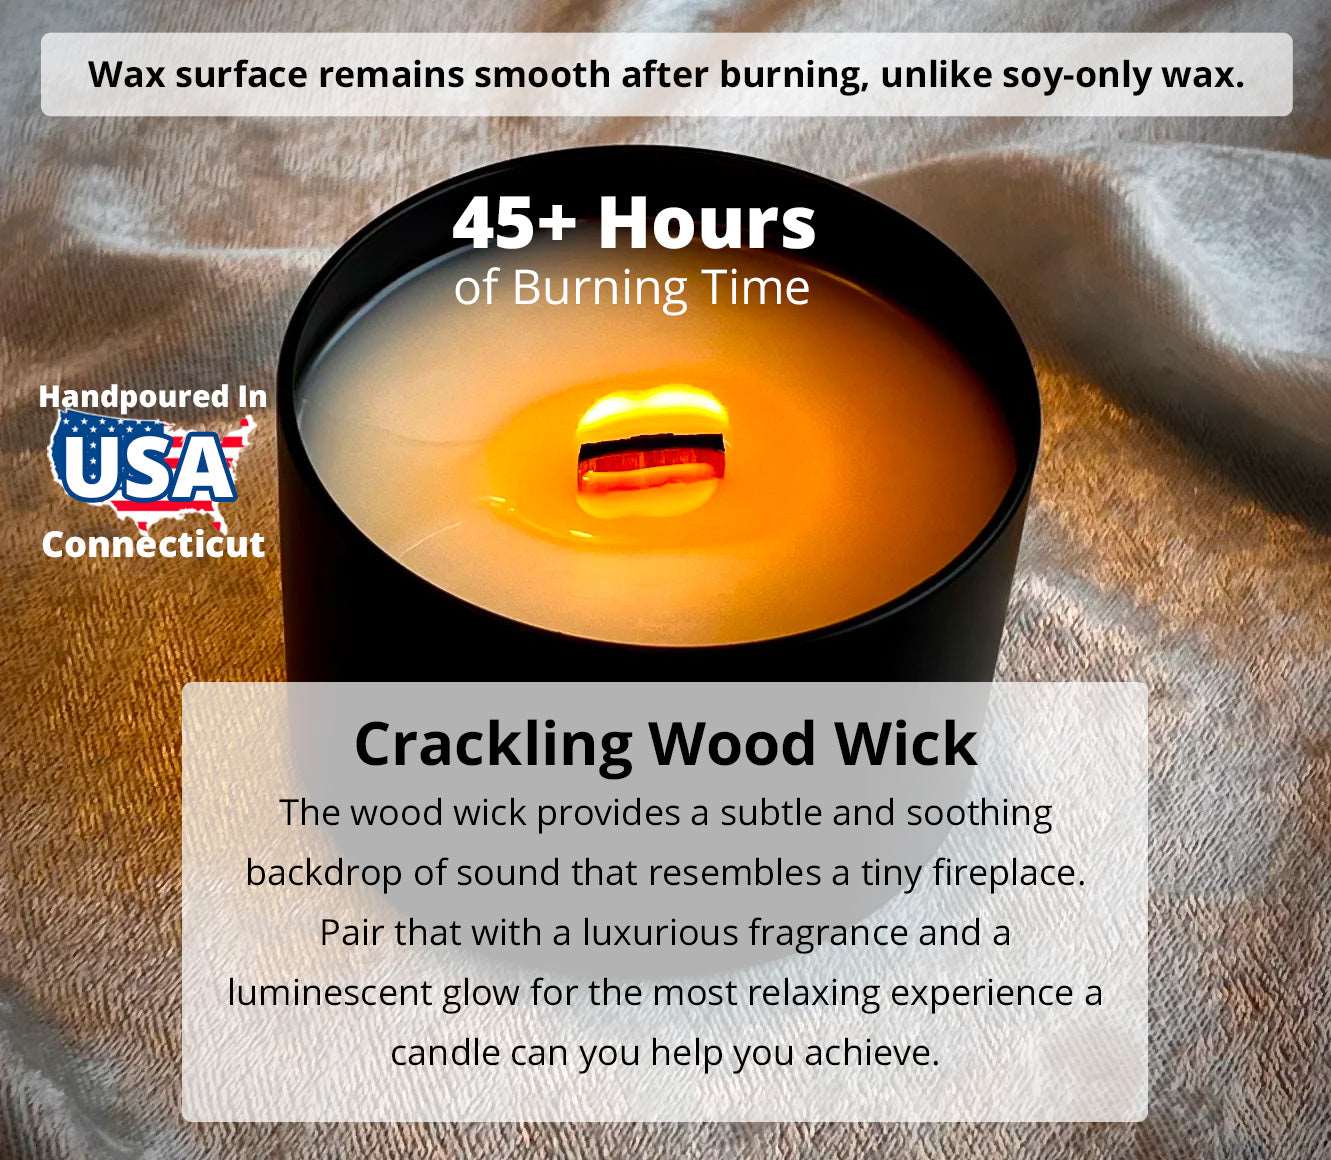 Personalized Crackling Wood Wick Scented Candle - Noun, Definition